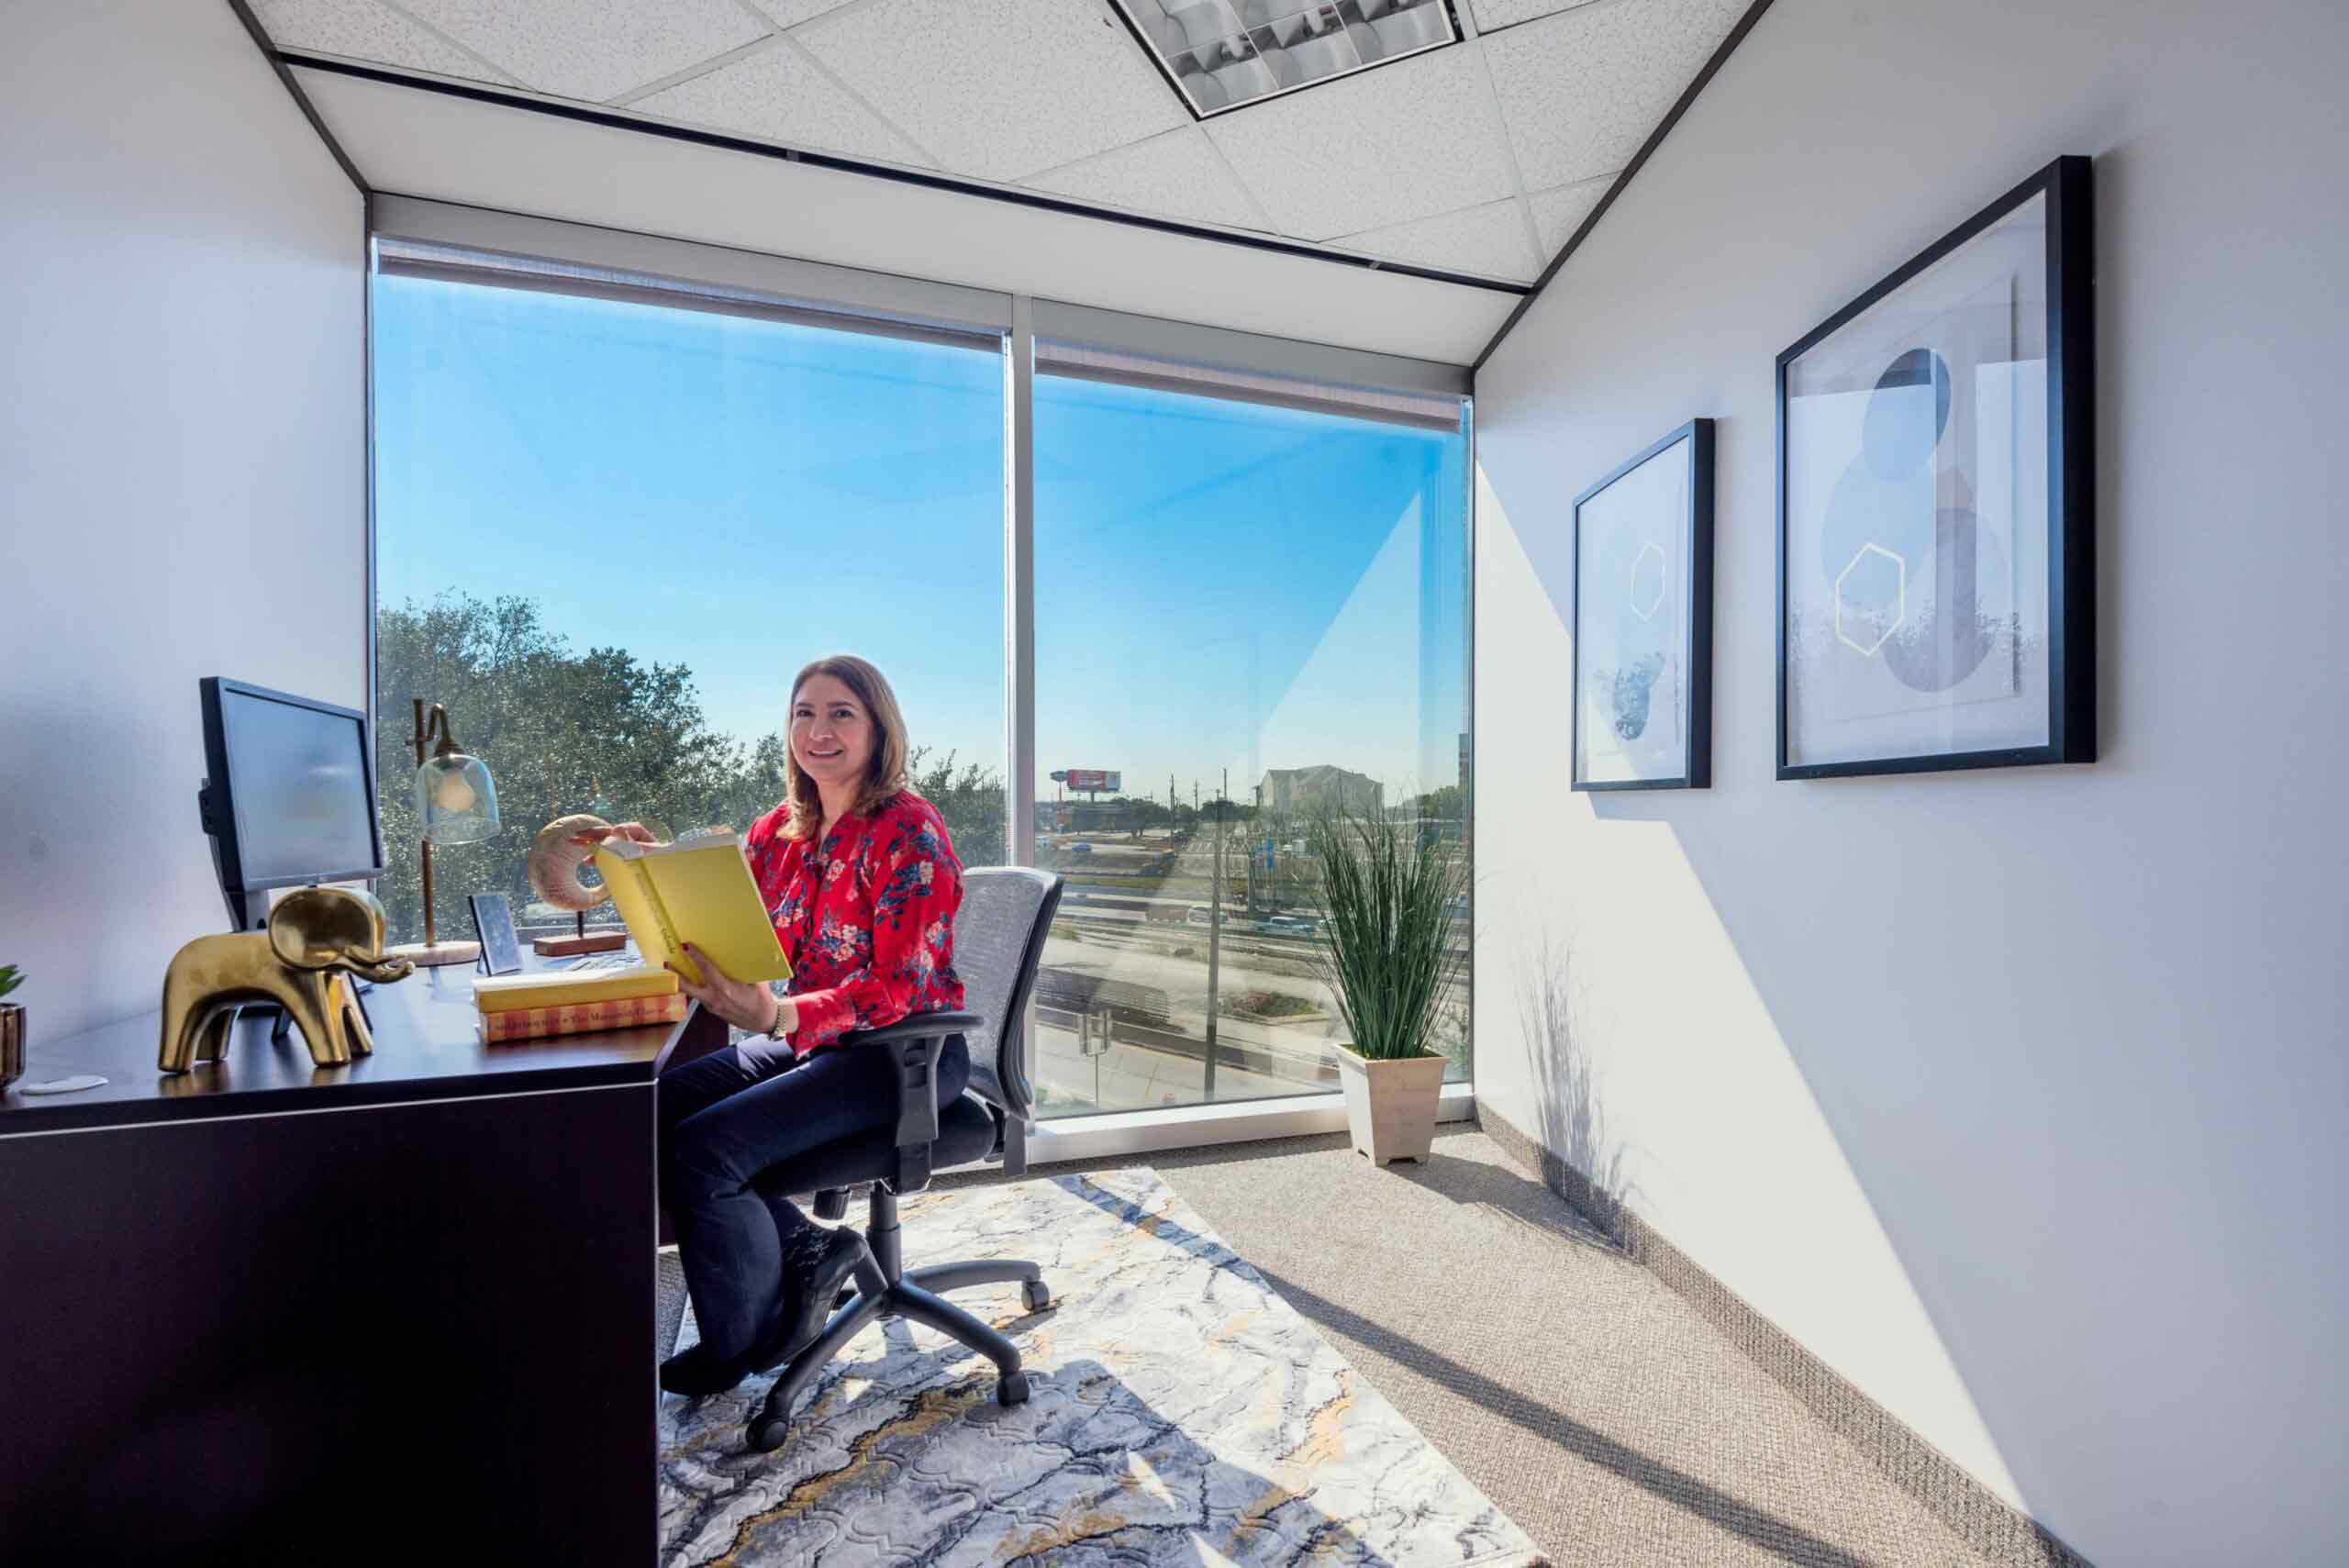 Office space for one in North Dallas with floor to ceiling windows and natural light